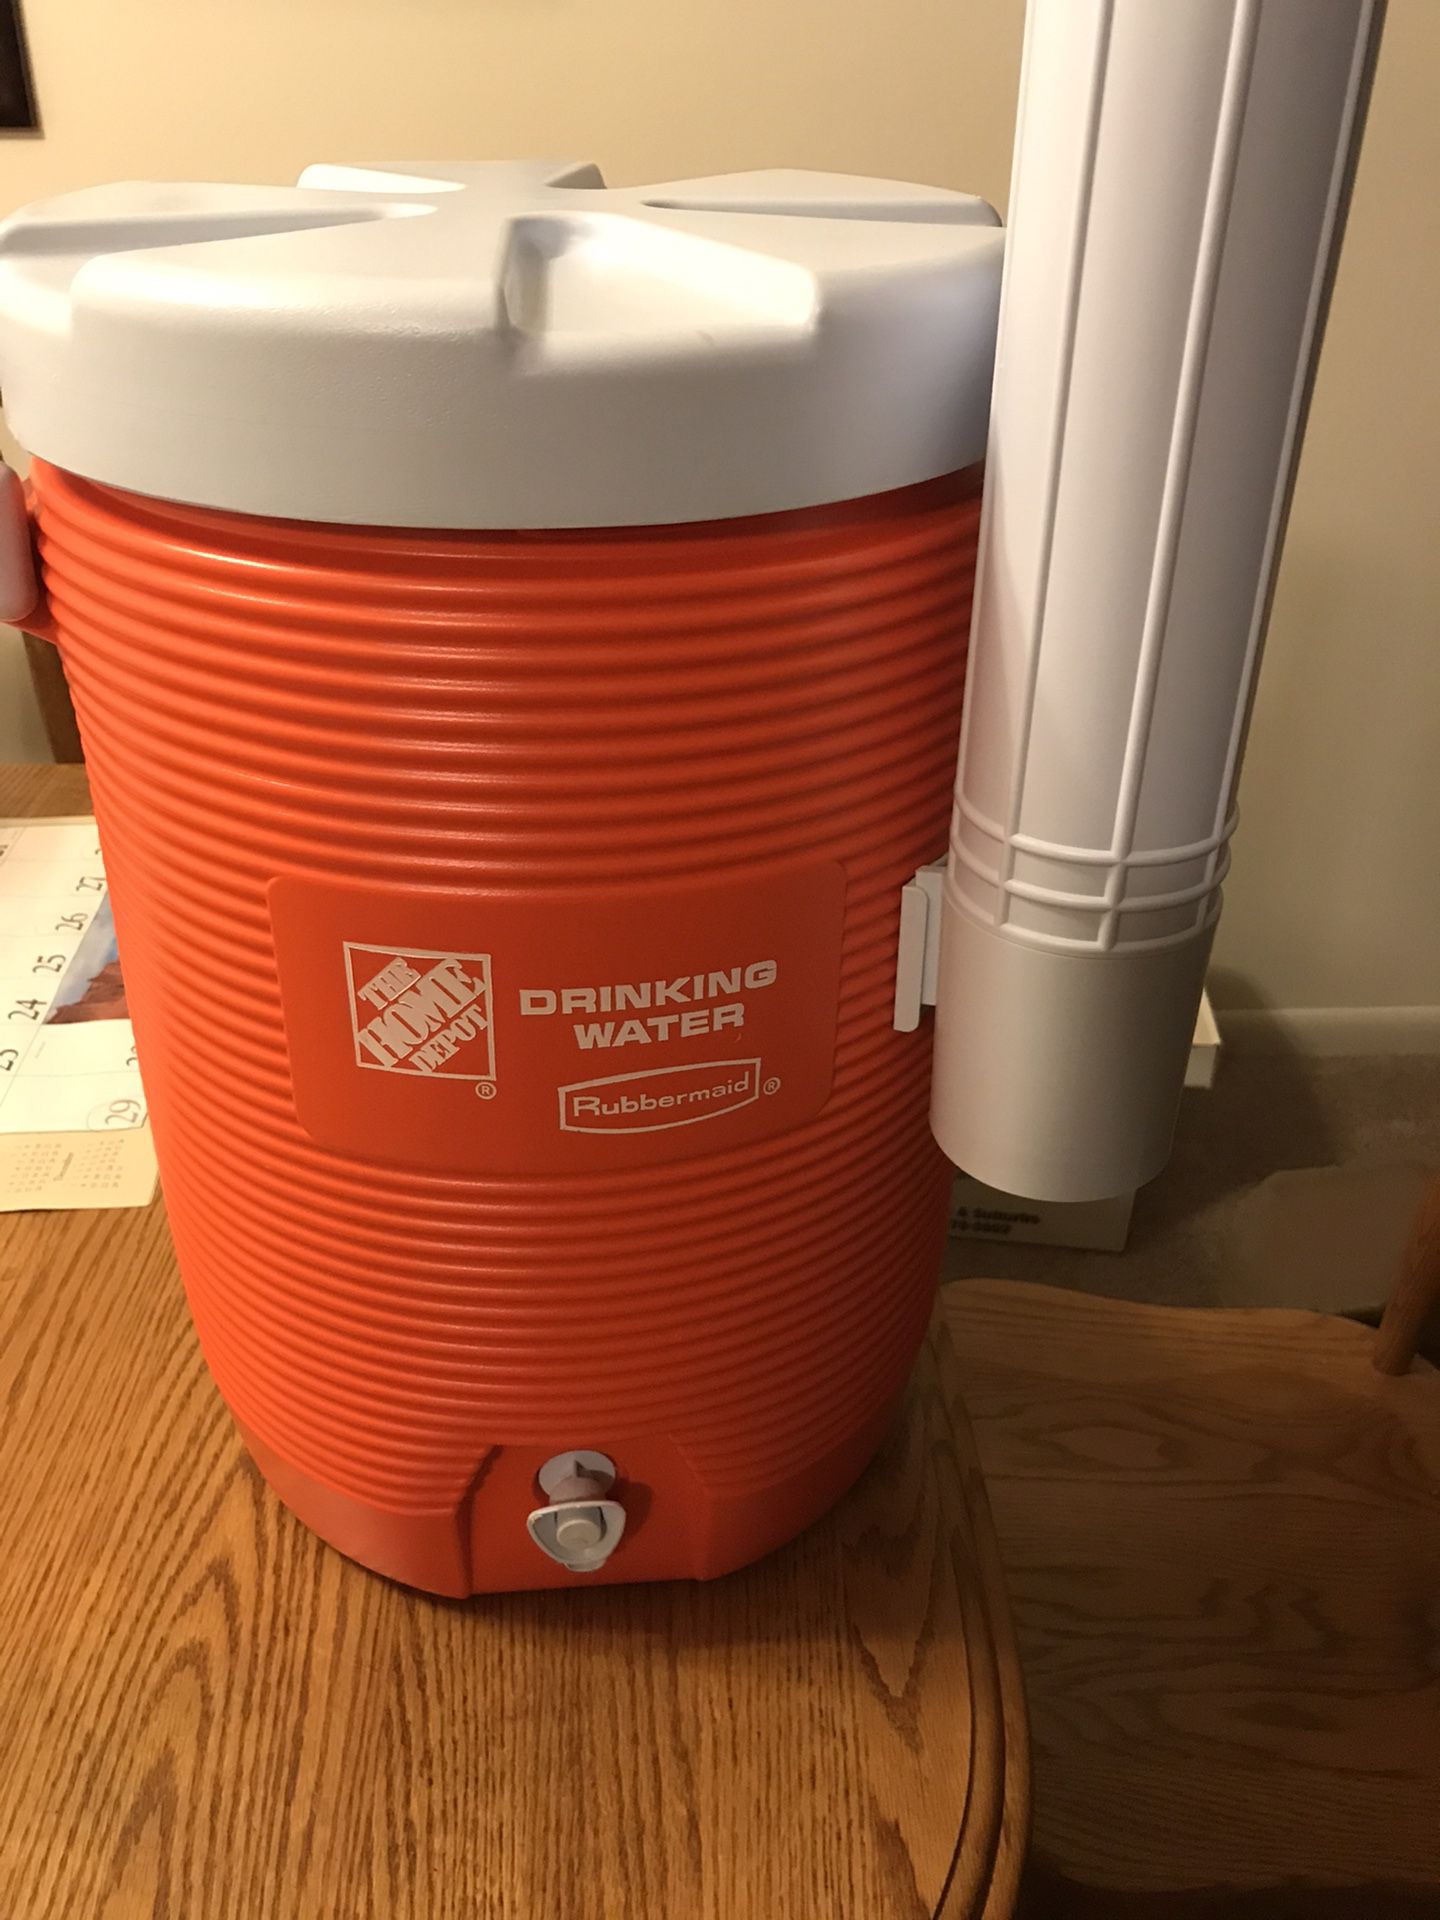 Brand new 5 gal water cooler. Check out my other items I have for sale. Pick up in Lombard.